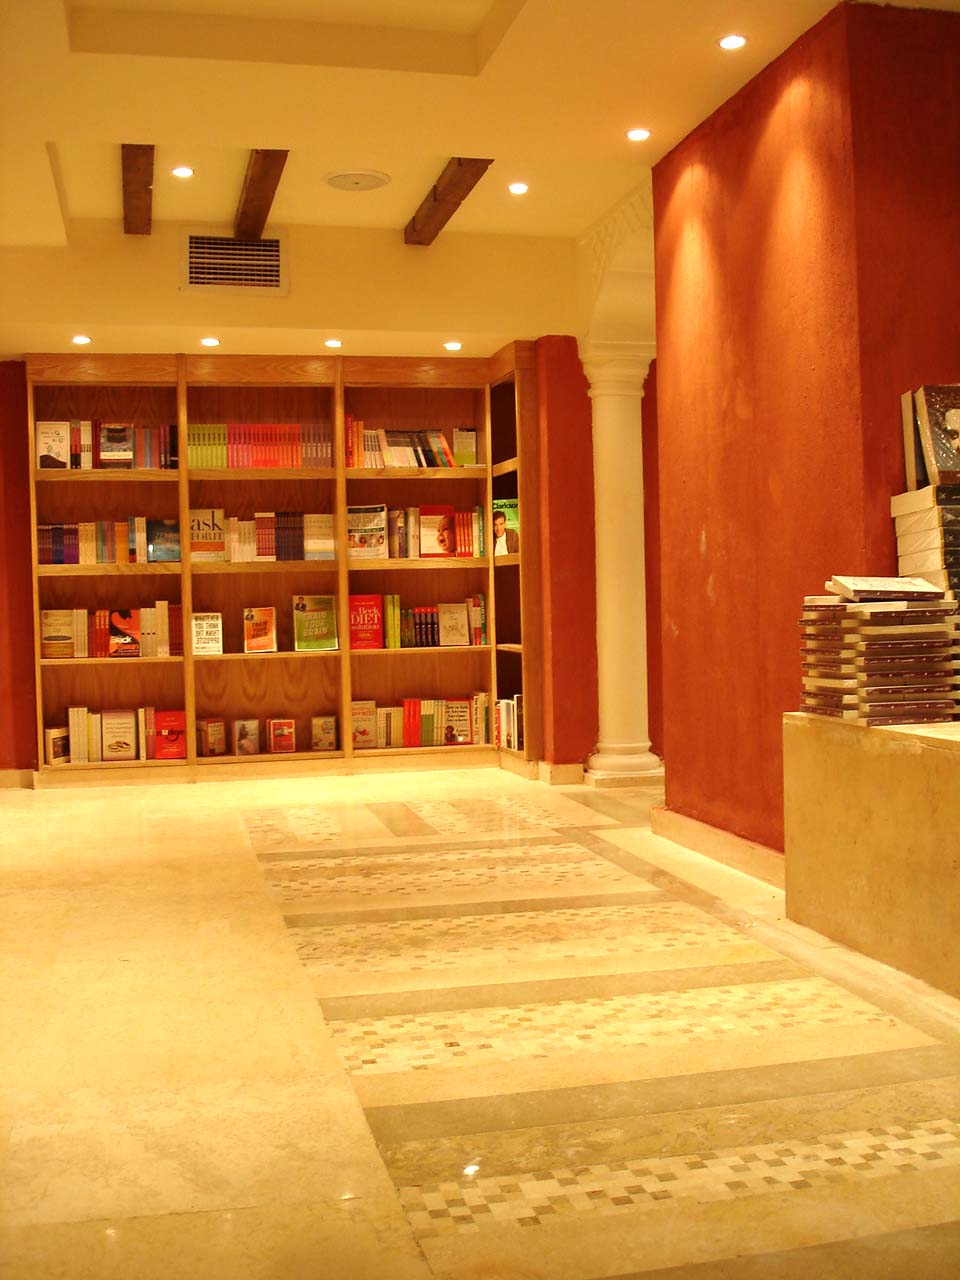 

<div style=color:#000>Location:Al-Zamalek, Cairo 
               Year:2010
               Status:Completed </div>
 The interior design theme is a continuation of the andalusian style that characterizes the bookstore chain. In this branch, which stretches over 2 floors, a central wooden staircase spiraling inside an illuminated glass cube lightens up the whole space beneath and connects both floors while it acts as a generator for chance encounters by remaining in a state of constant flux